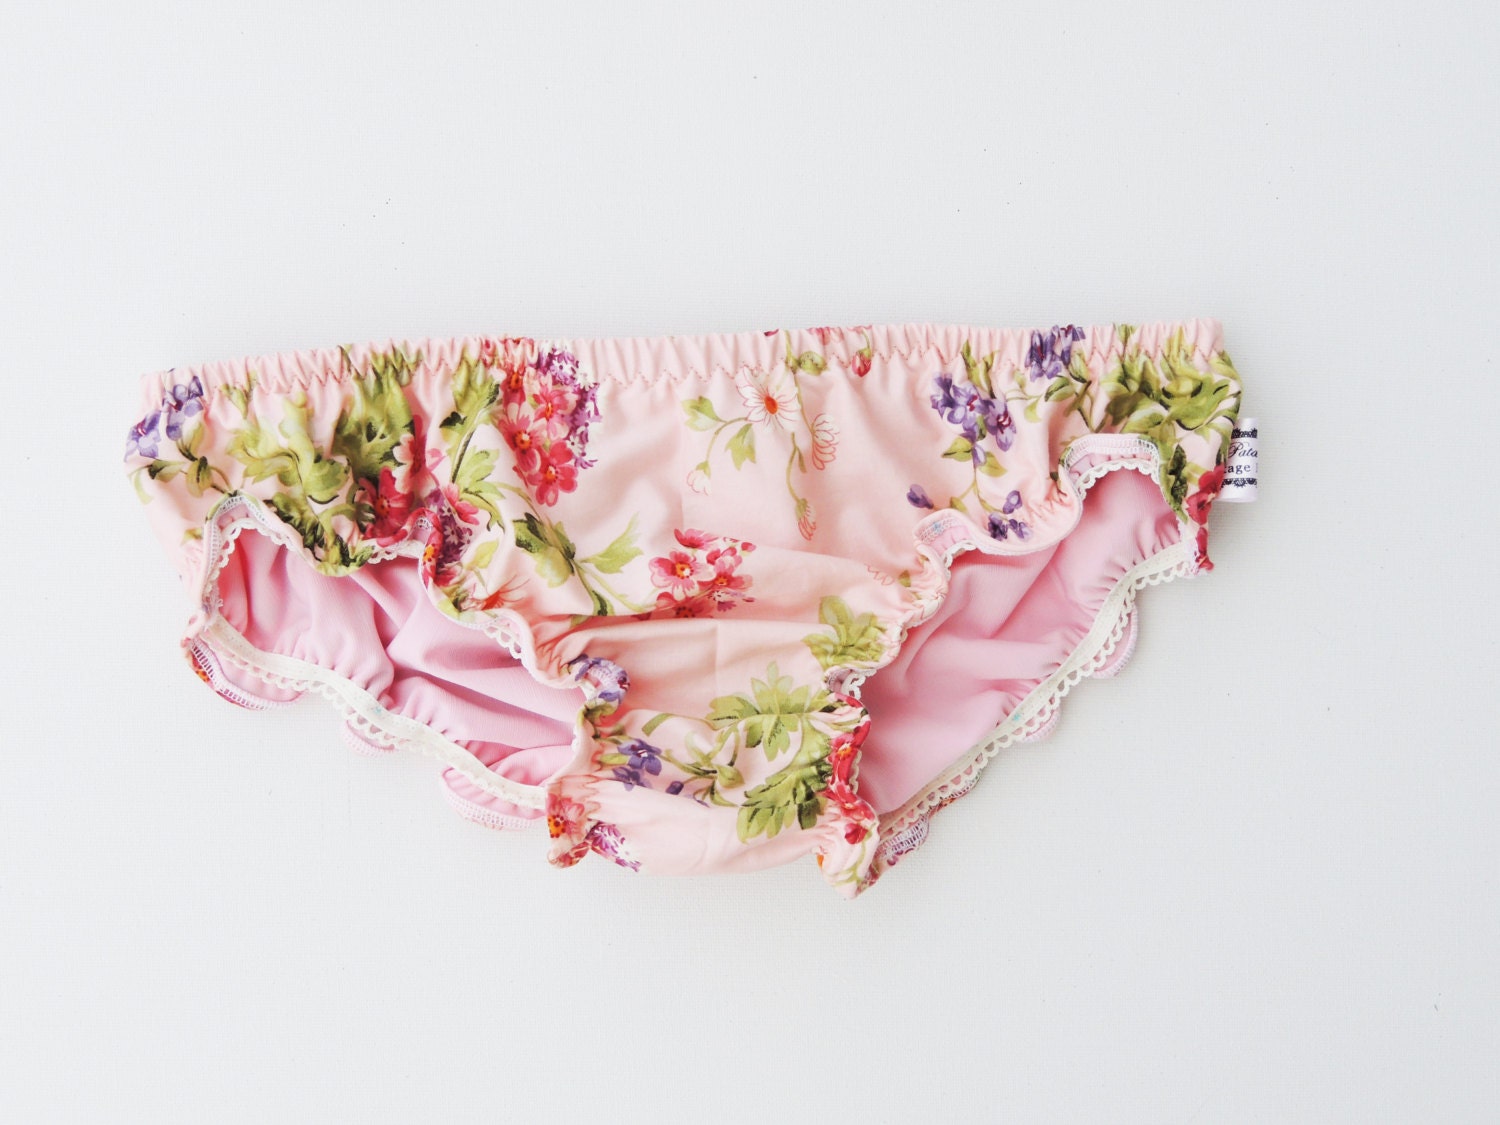 SALE. XS Panties Vintage style. . Pink Vintage Floral Series. Ruffle Panties. Sexy and cute. - PitaPataDiVa